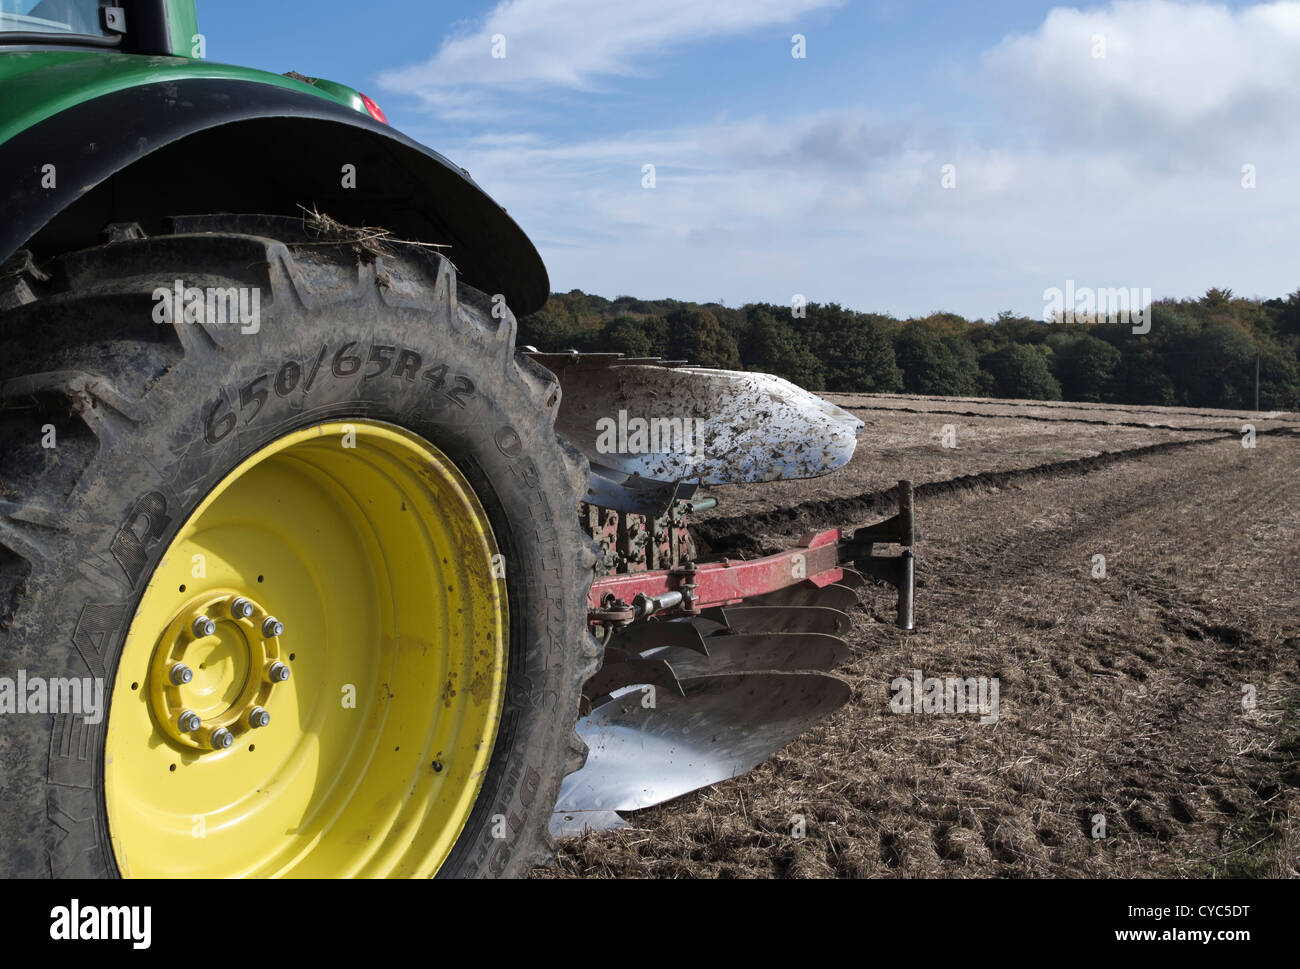 john deere tractor with reversible plough at ploughing match demonstration Stock Photo